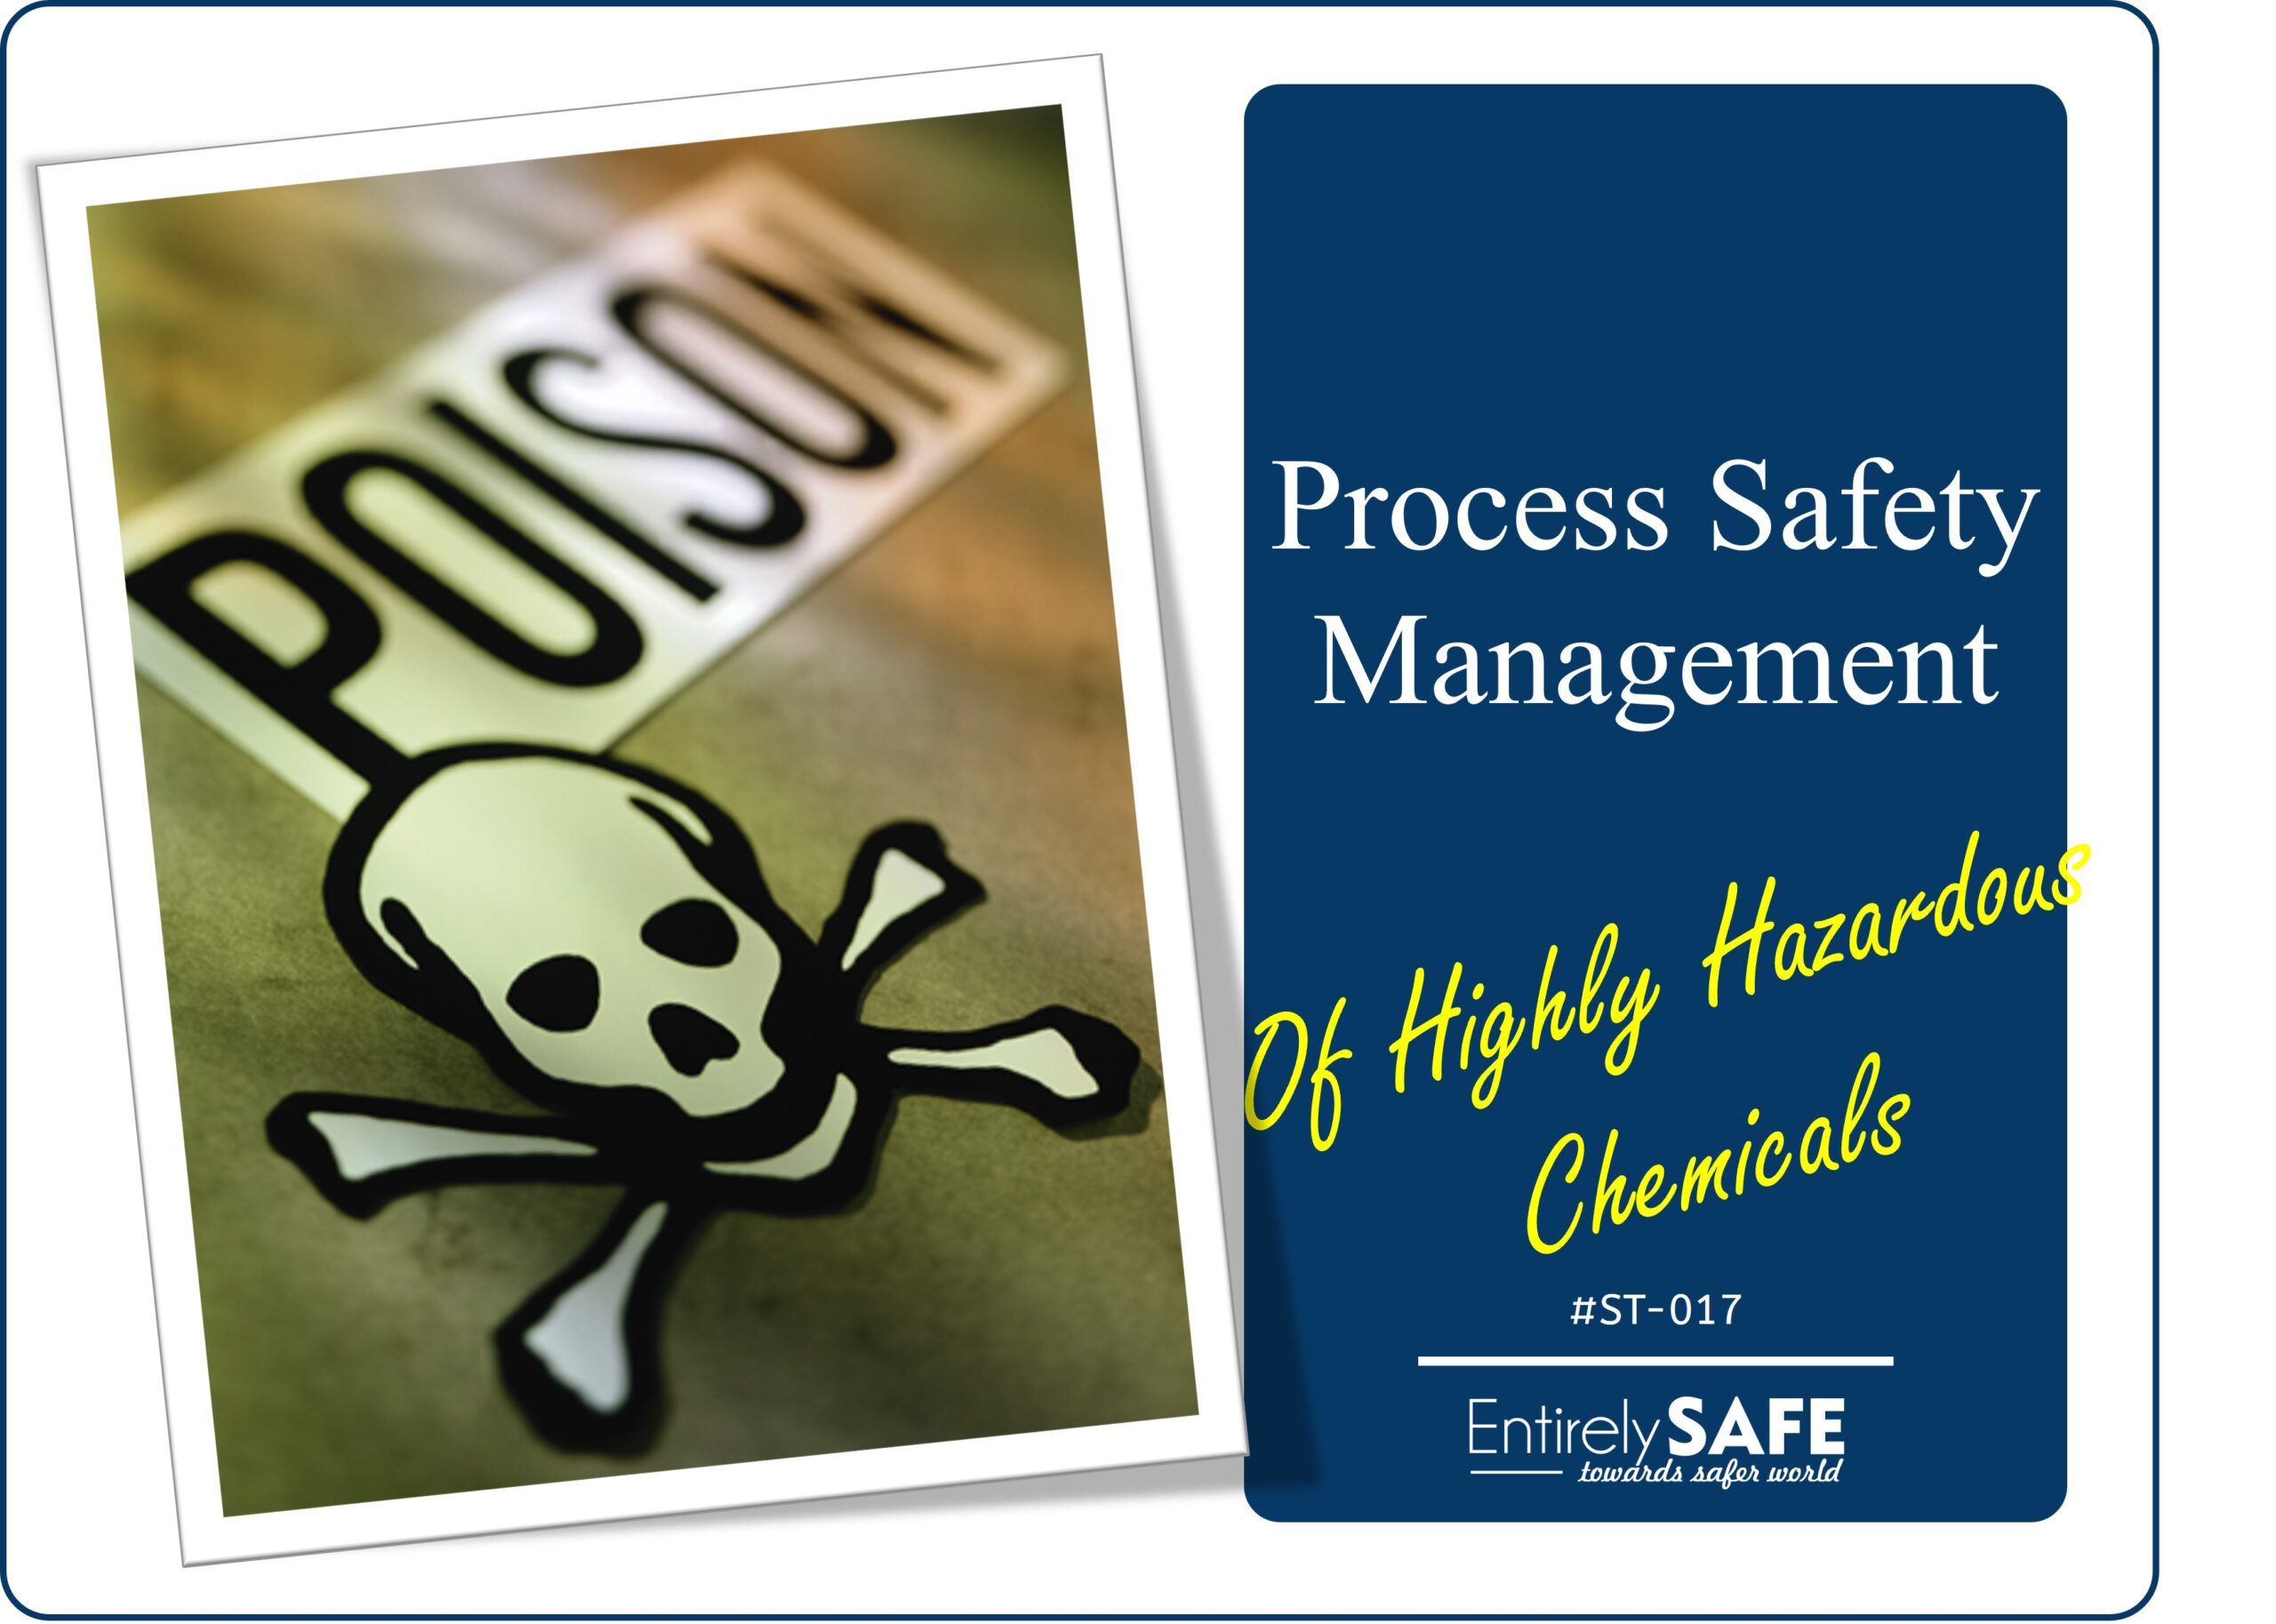 ST-017 - Process Safety Management of Highly Hazardous Chemicals